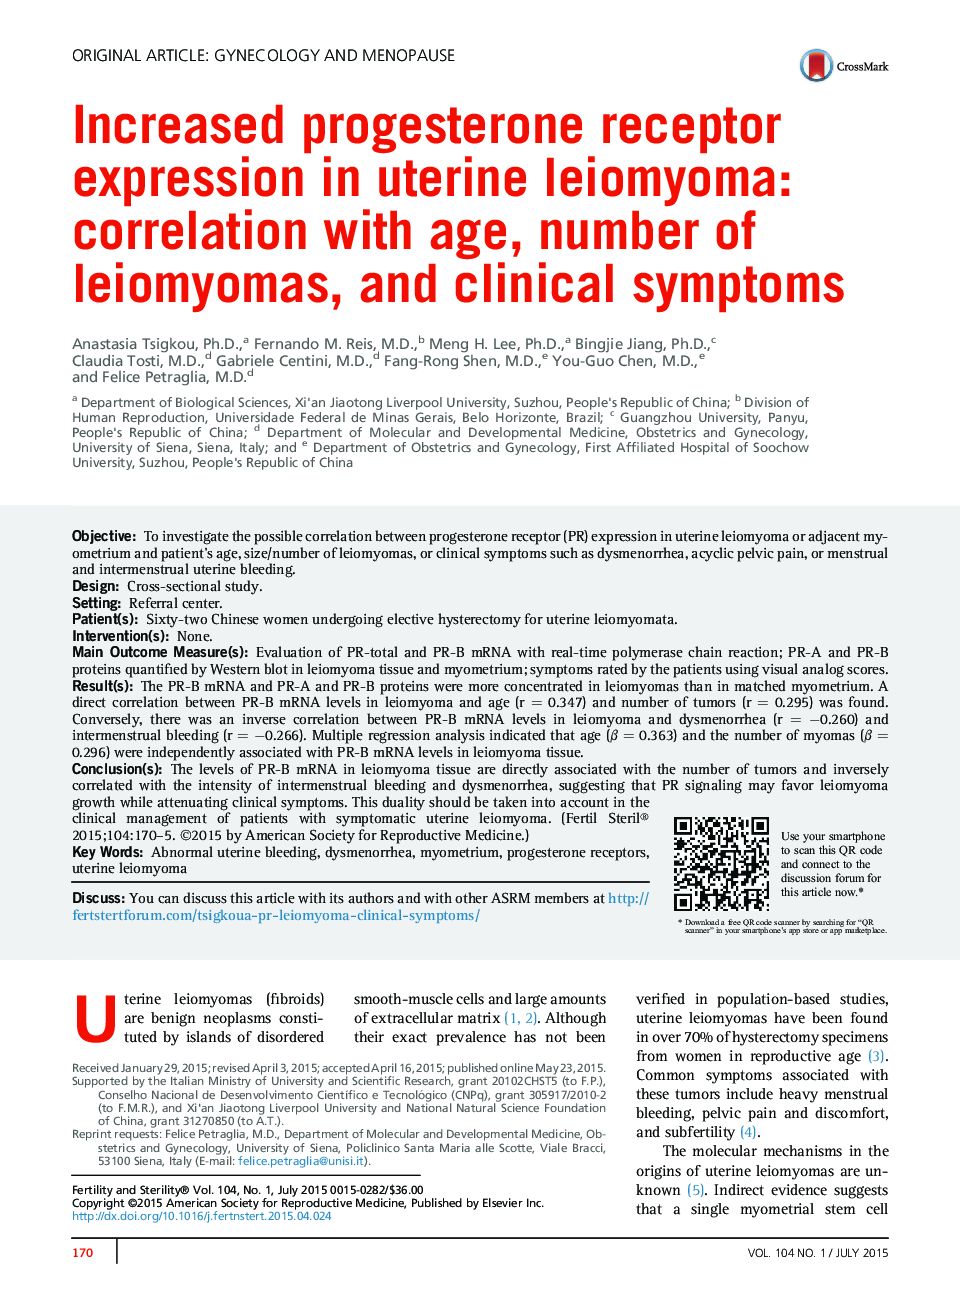 Increased progesterone receptor expression in uterine leiomyoma: correlation with age, number of leiomyomas, and clinical symptoms